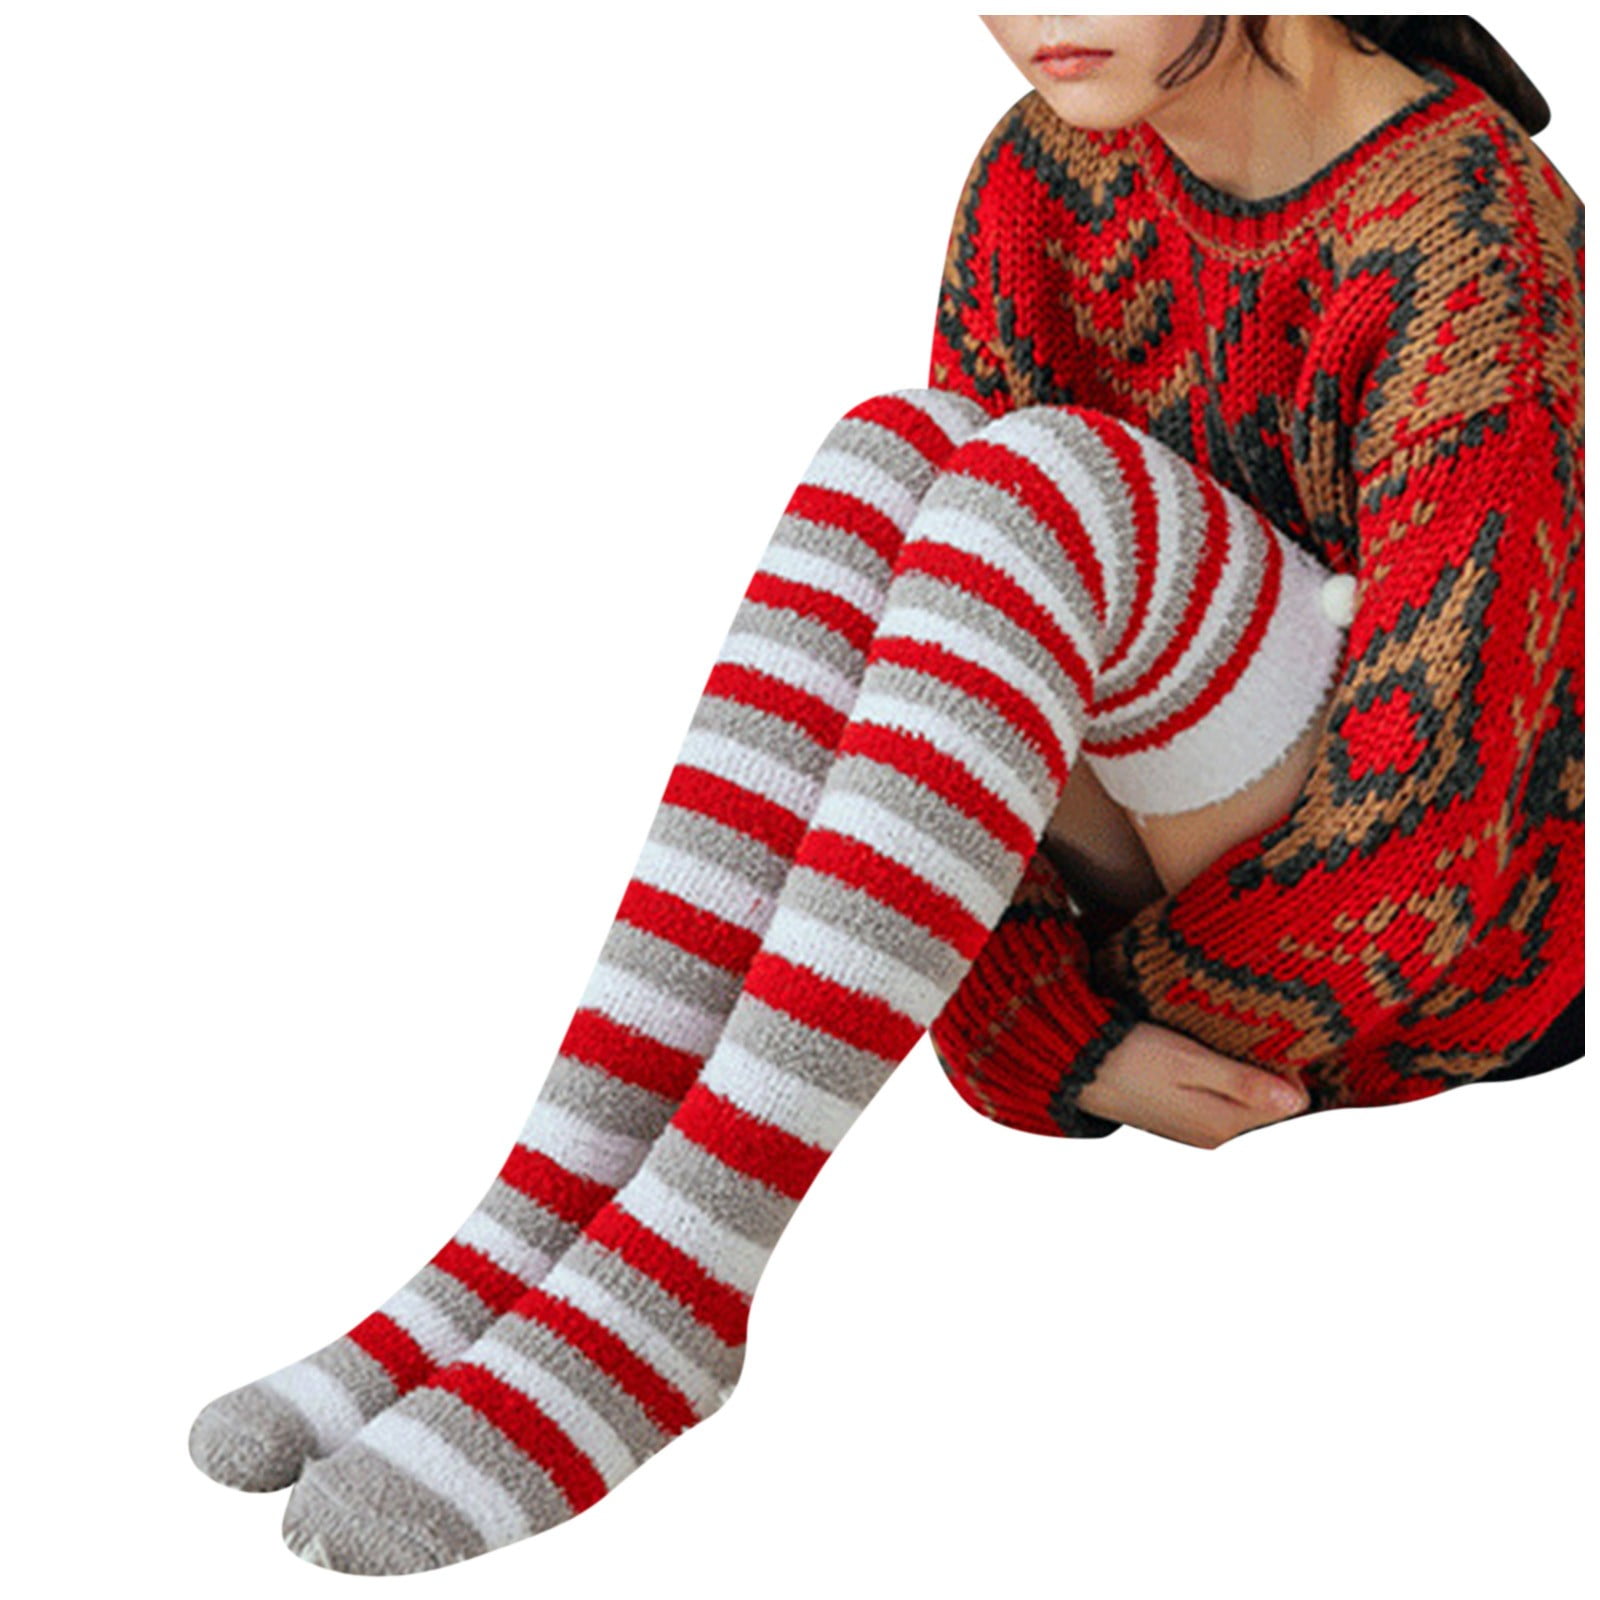 Luxtrada Women Winter Warm Knit Cable Long Socks Stockings Casual Wool Thigh  High Over Knee High Socks Girls Female Leg Warmers 1 Pairs 